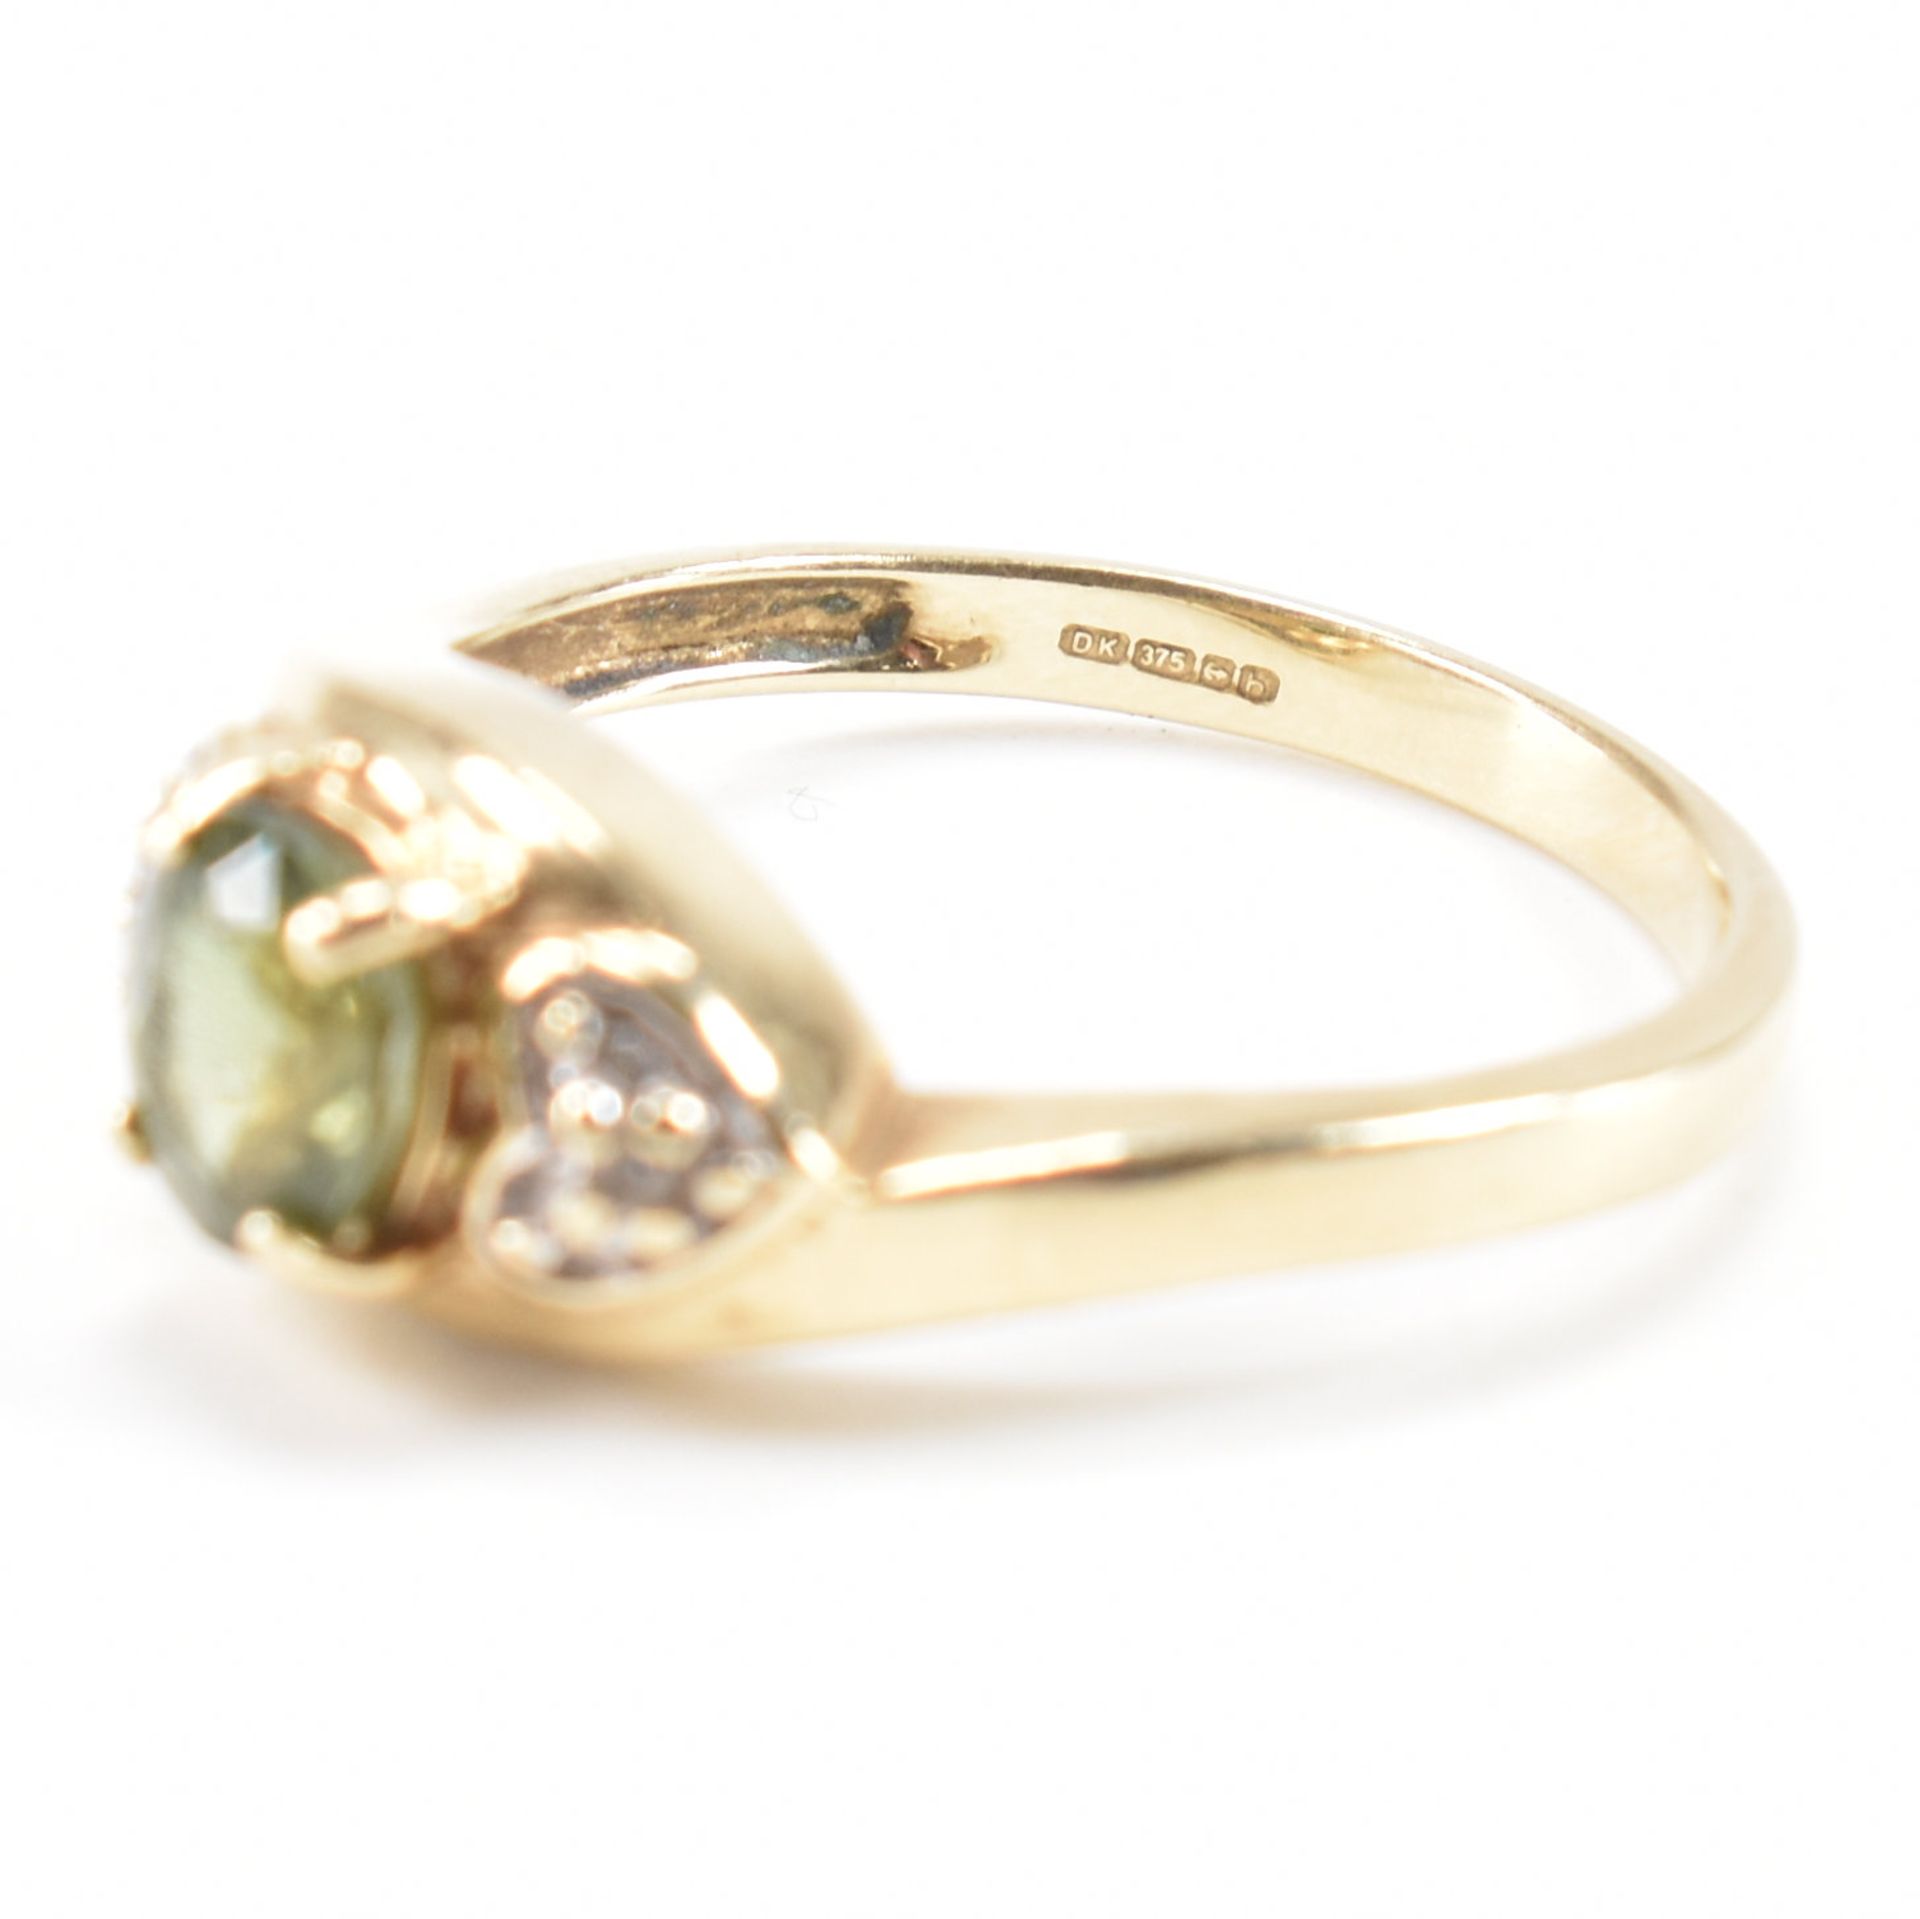 HALLMARKED 9CT GOLD & GREEN STONE CROSSOVER RING - Image 6 of 8